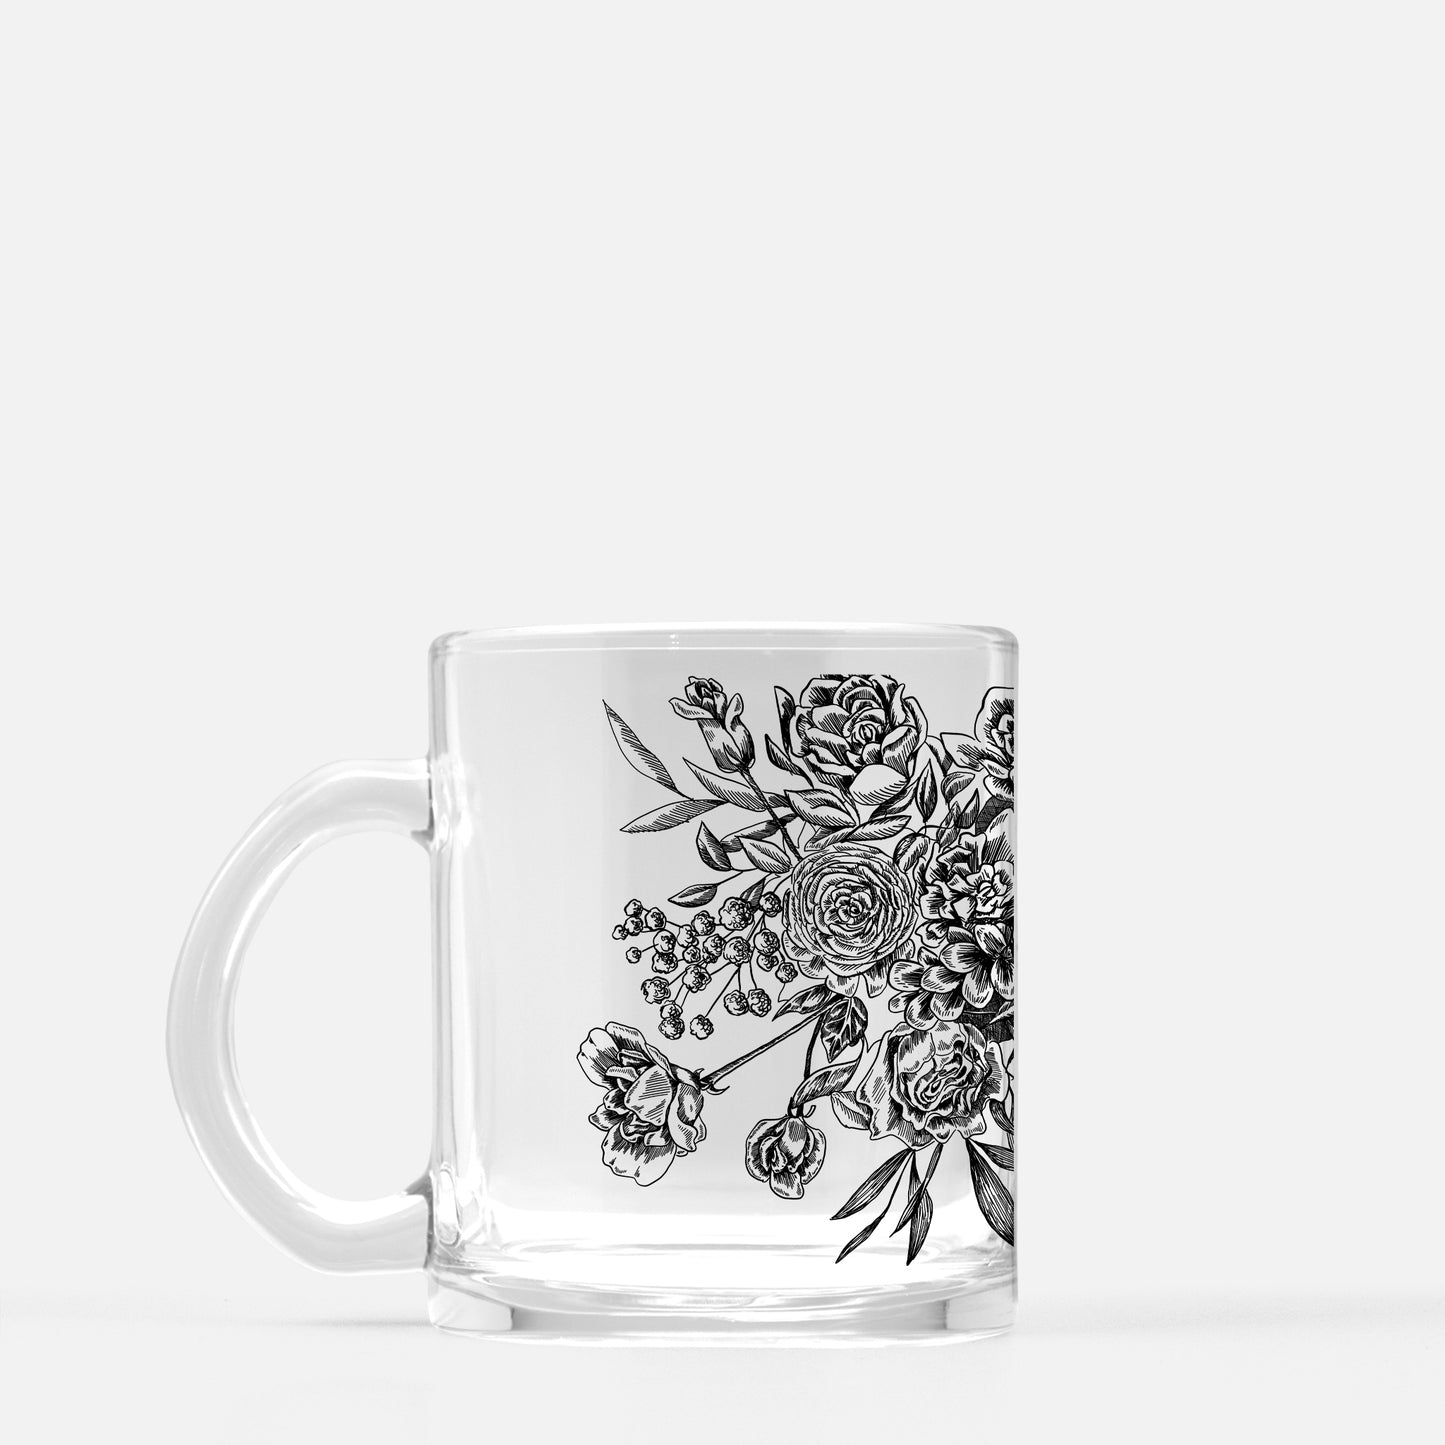 Clear glass mug with black florals by Rust Belt Love